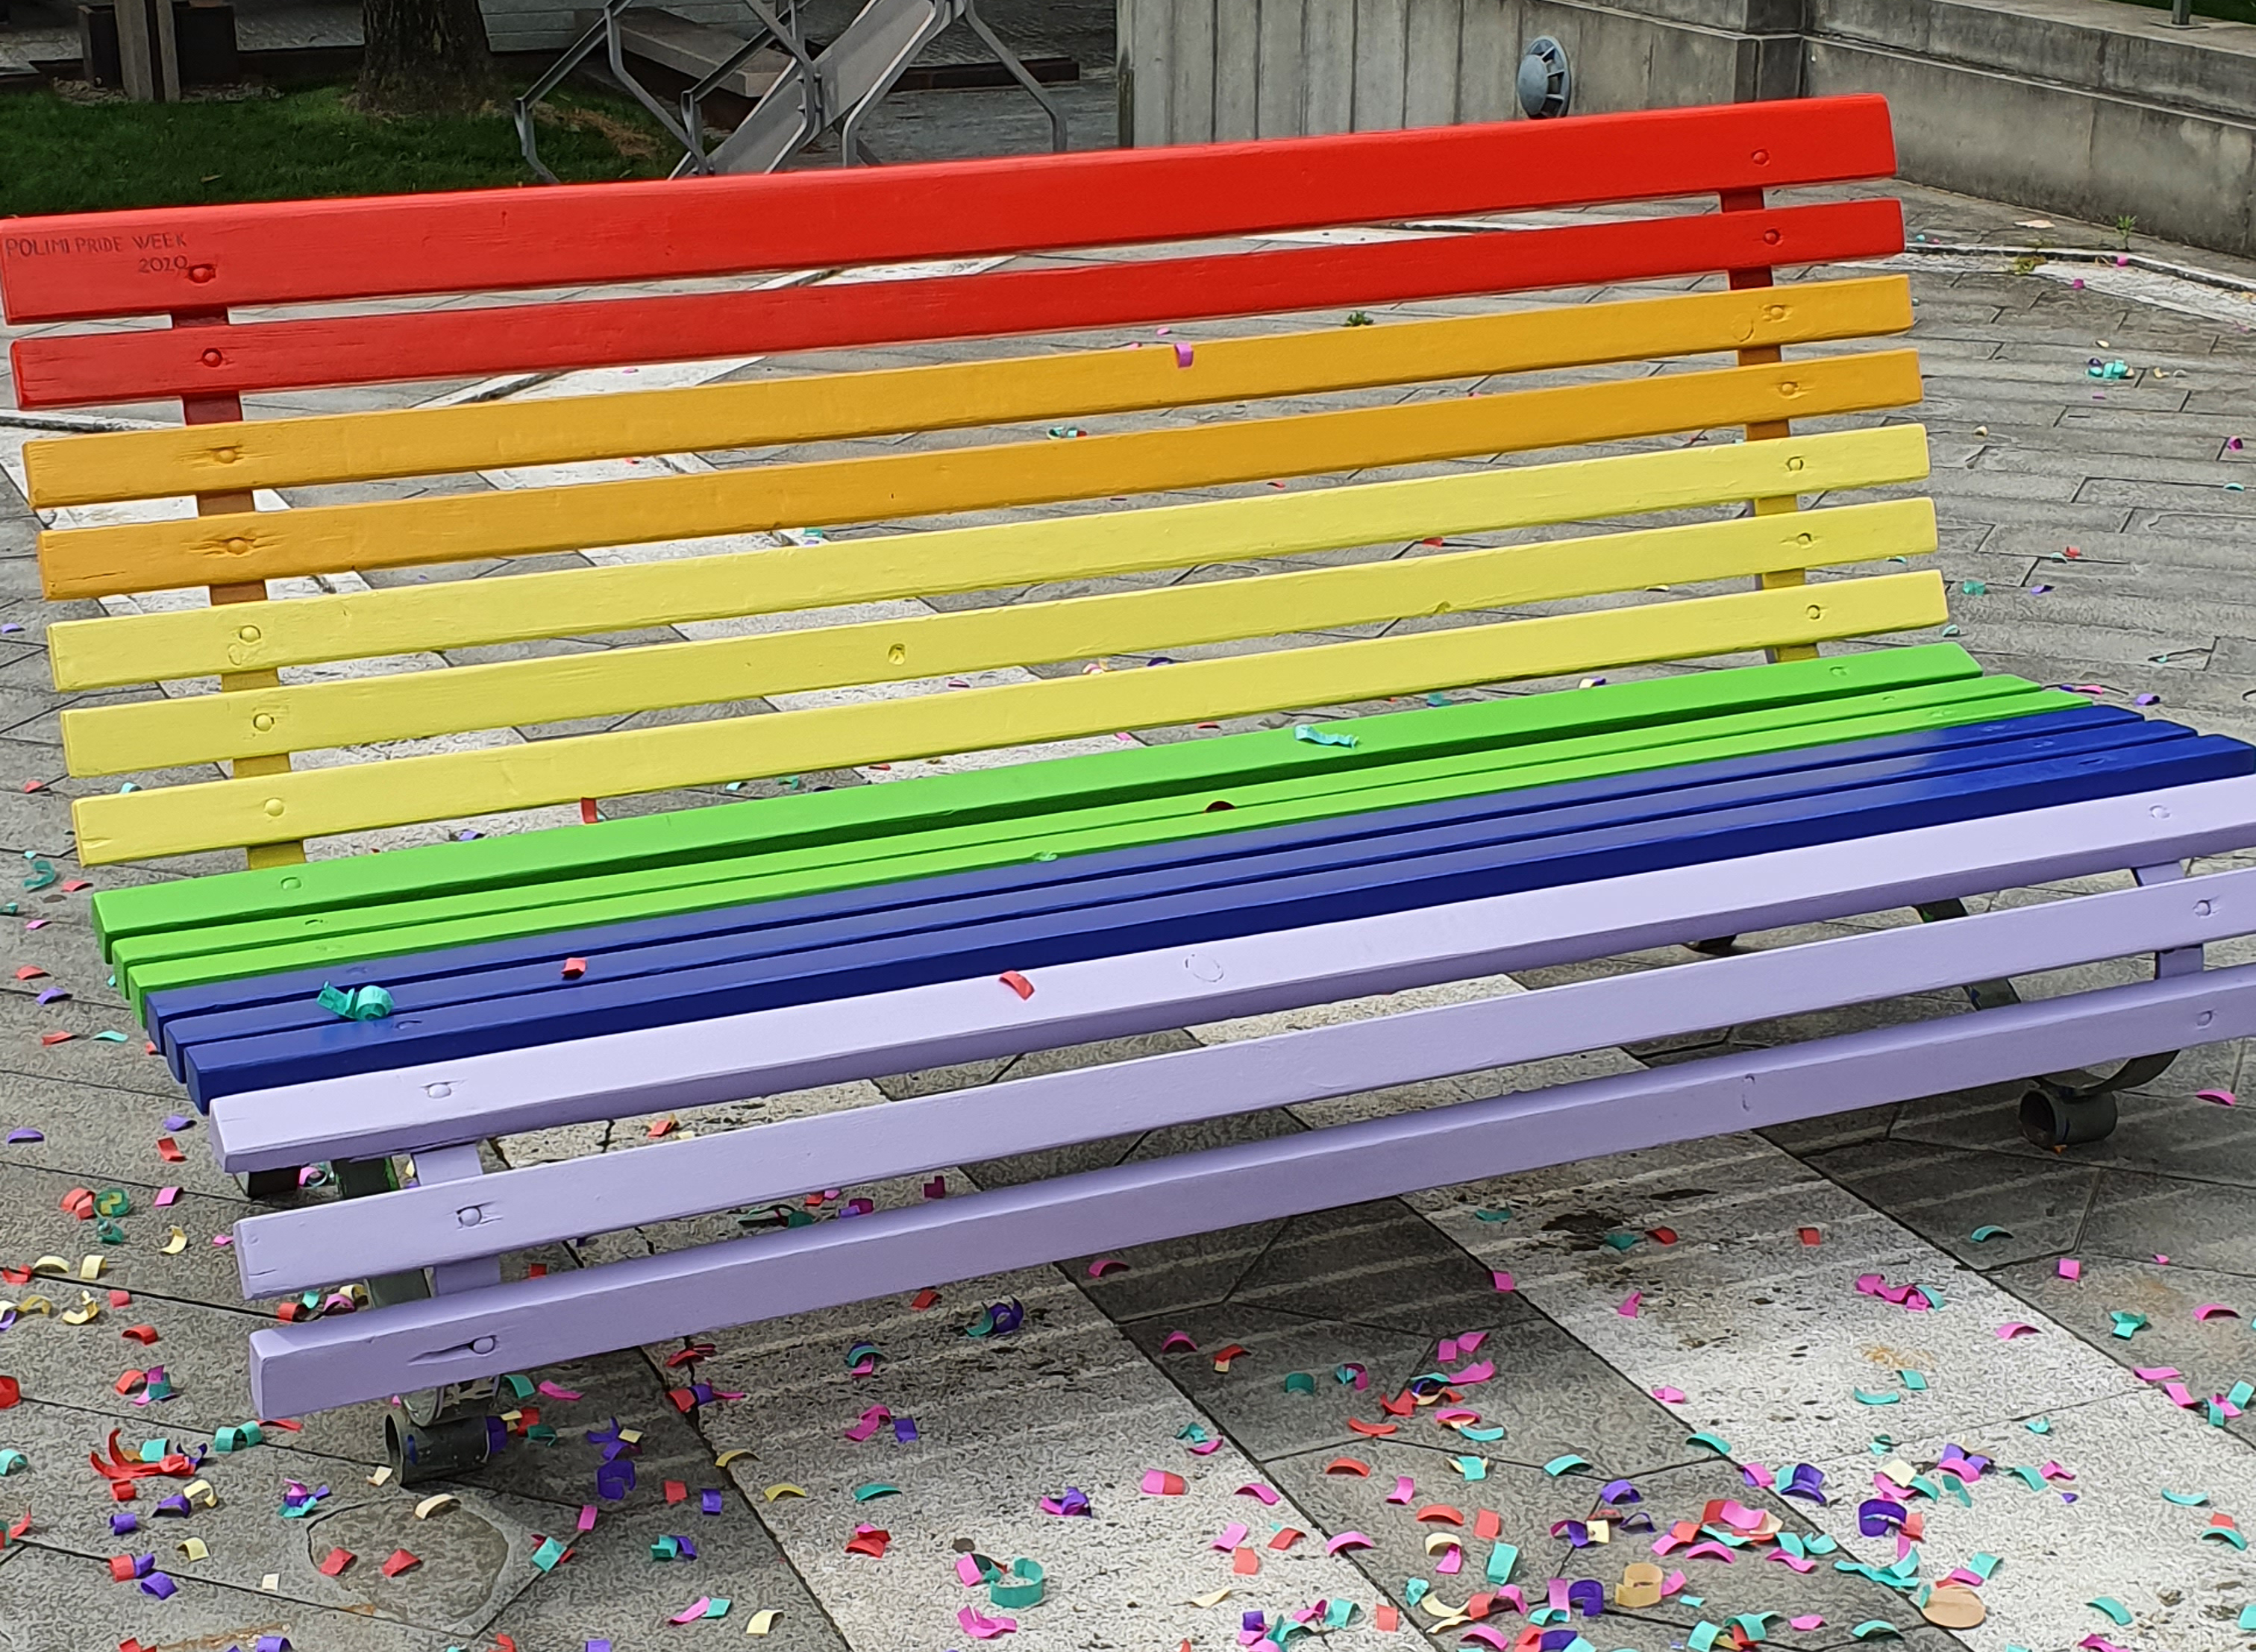 The rainbow bench painted for PoliMi Pride Week 2020